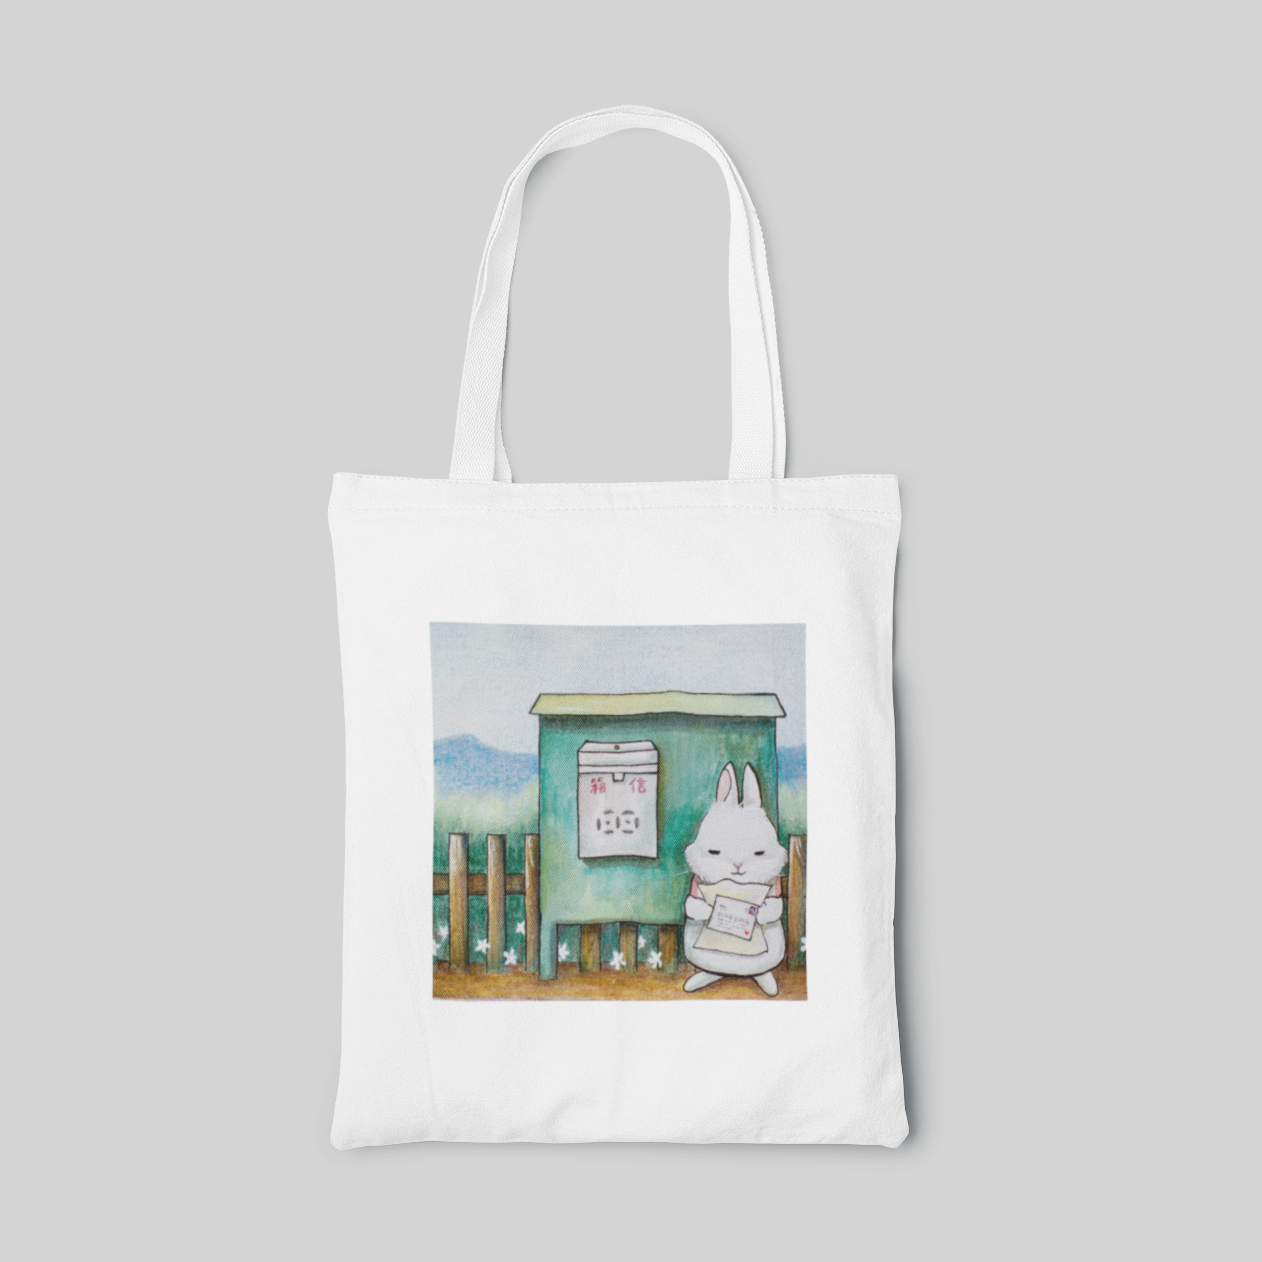 a lowbrow designed tote bag with a cartoon white rabbit reading letters next to the mail box, front side